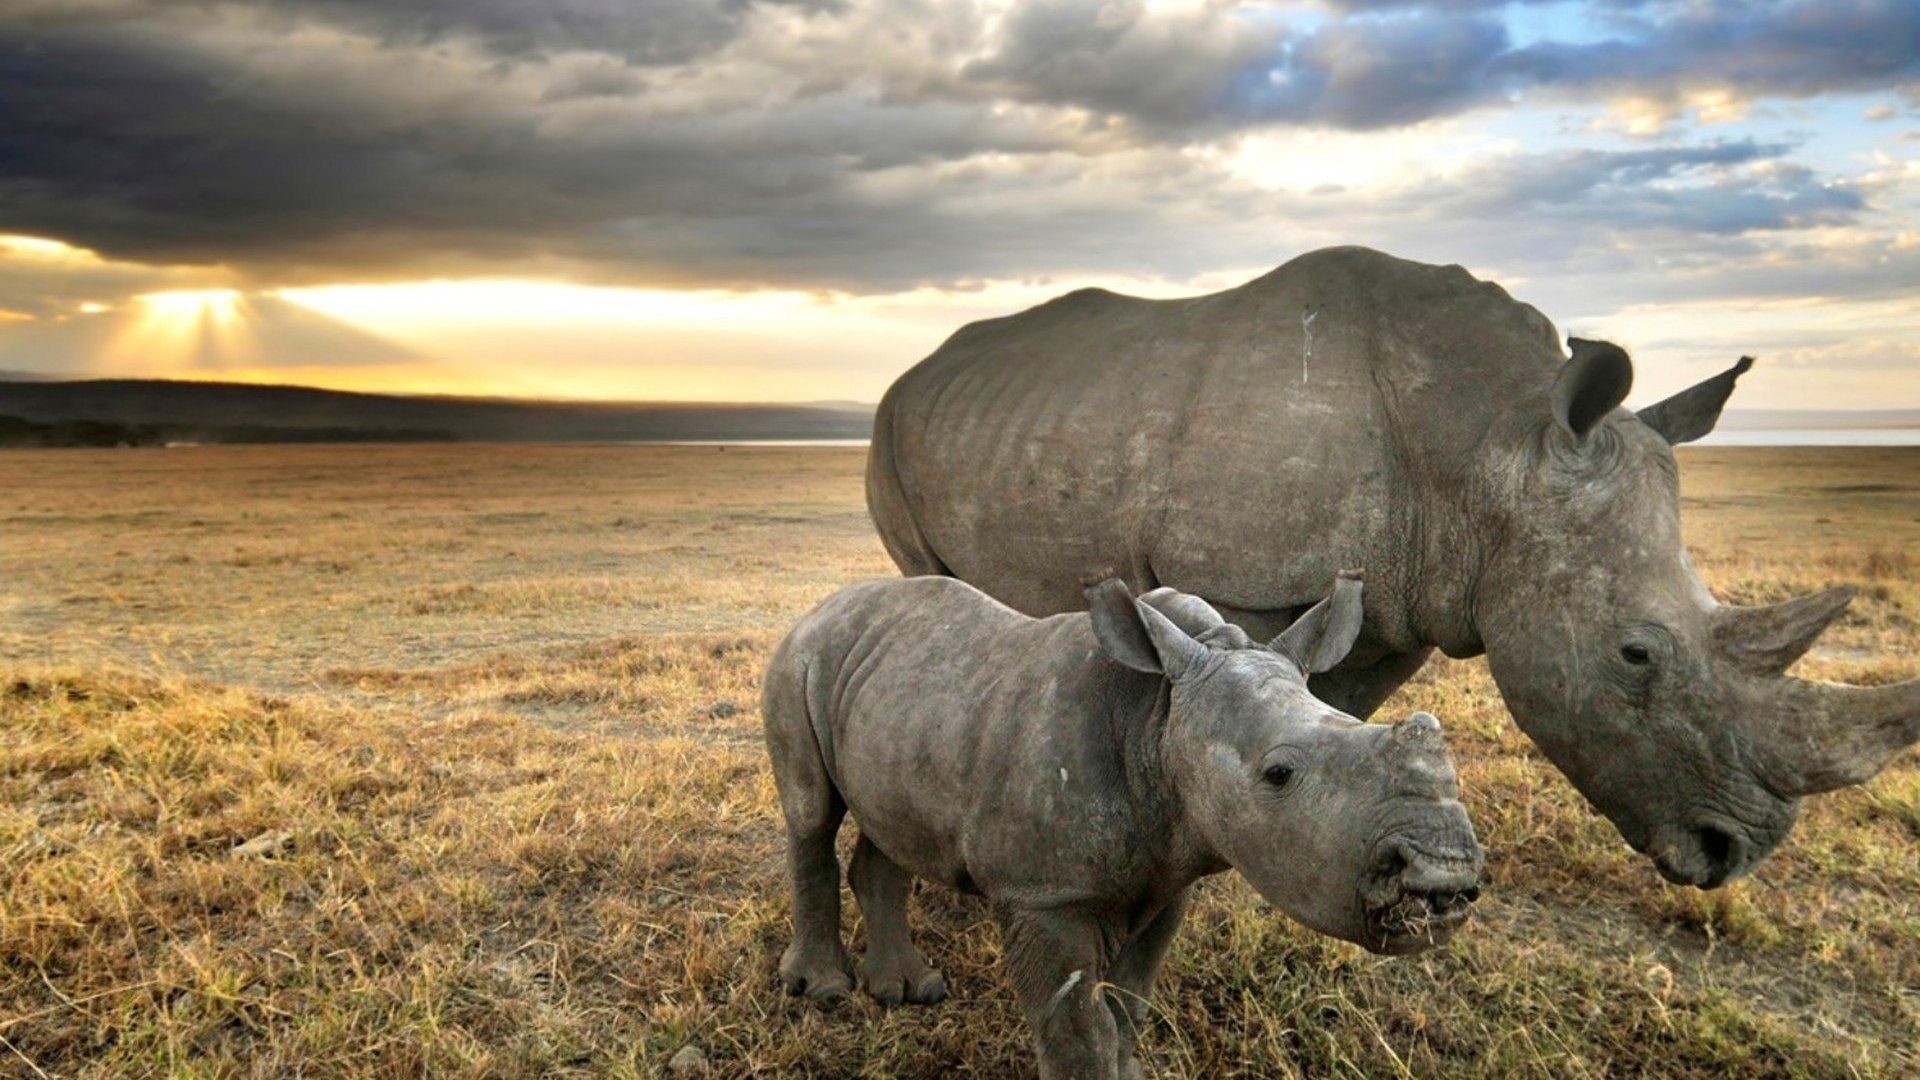 Rhino wallpapers pictures